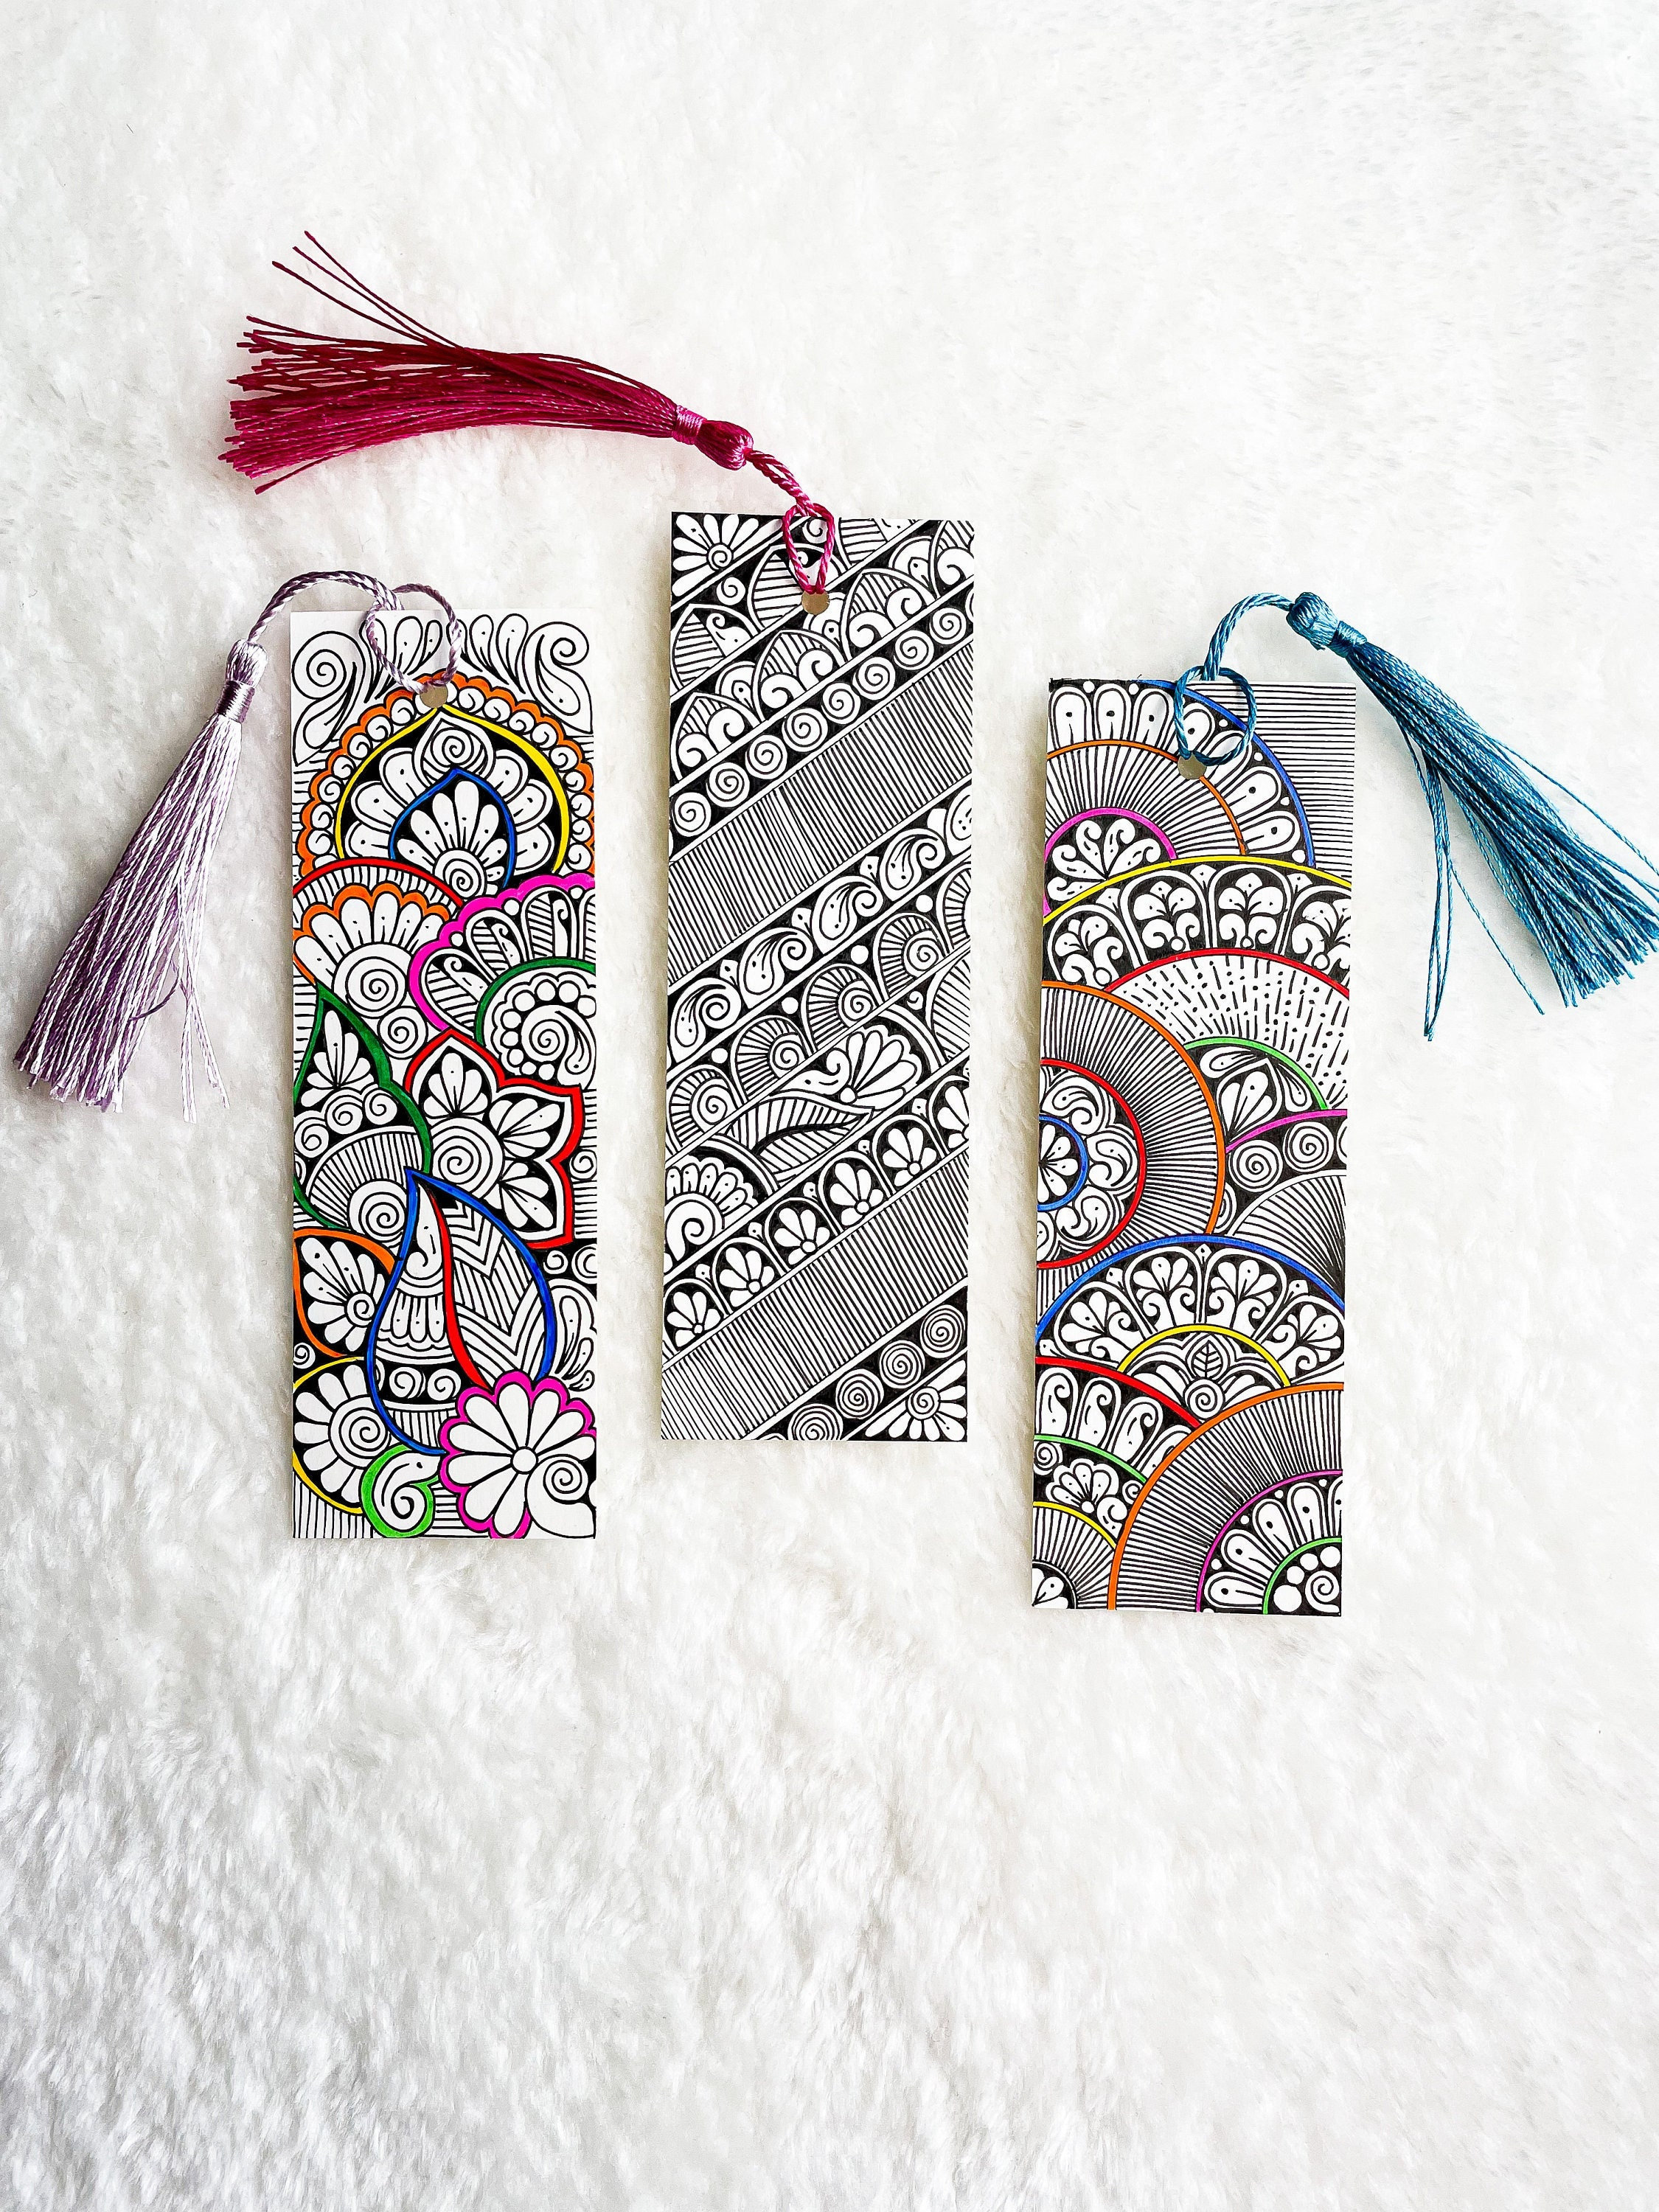 Art Bookmarks, Clear Page Bookmark Making Kit Waterproof DIY Handcrafted  With Tassel For Holiday Gifts For DIY 